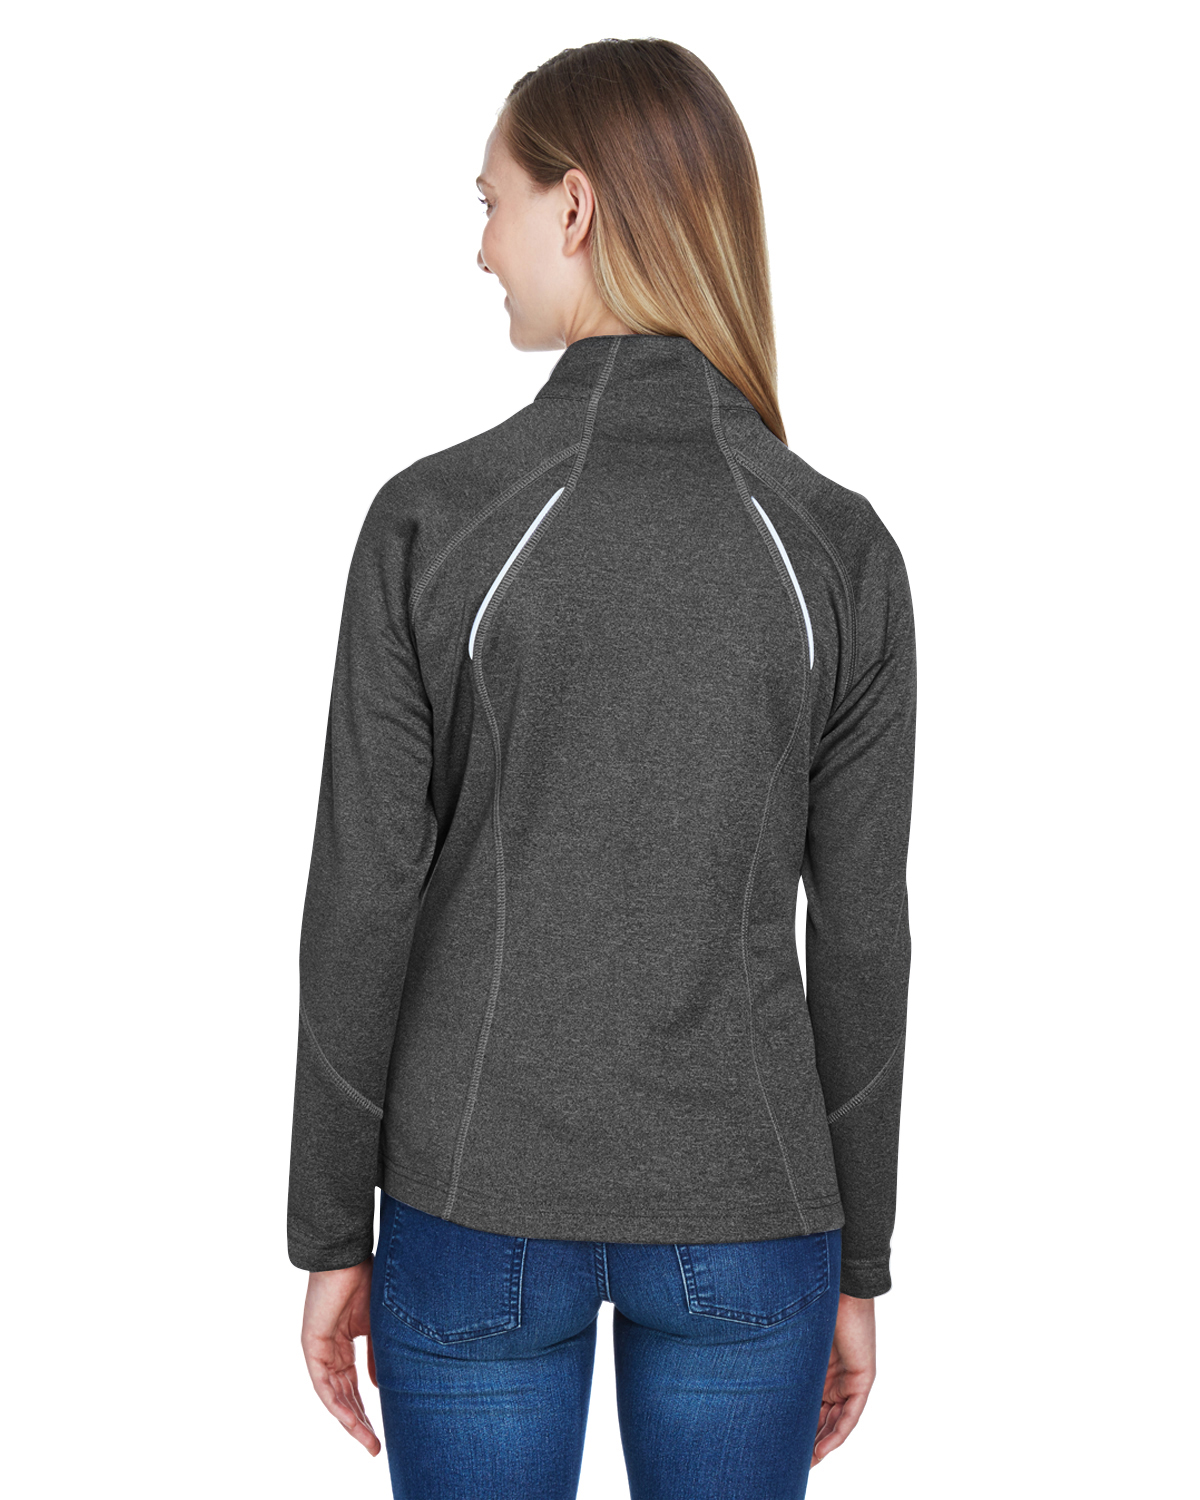 The Ash City - North End Ladies' Gravity Performance Fleece Jacket - CARBN HEATH 452 - S - image 2 of 2